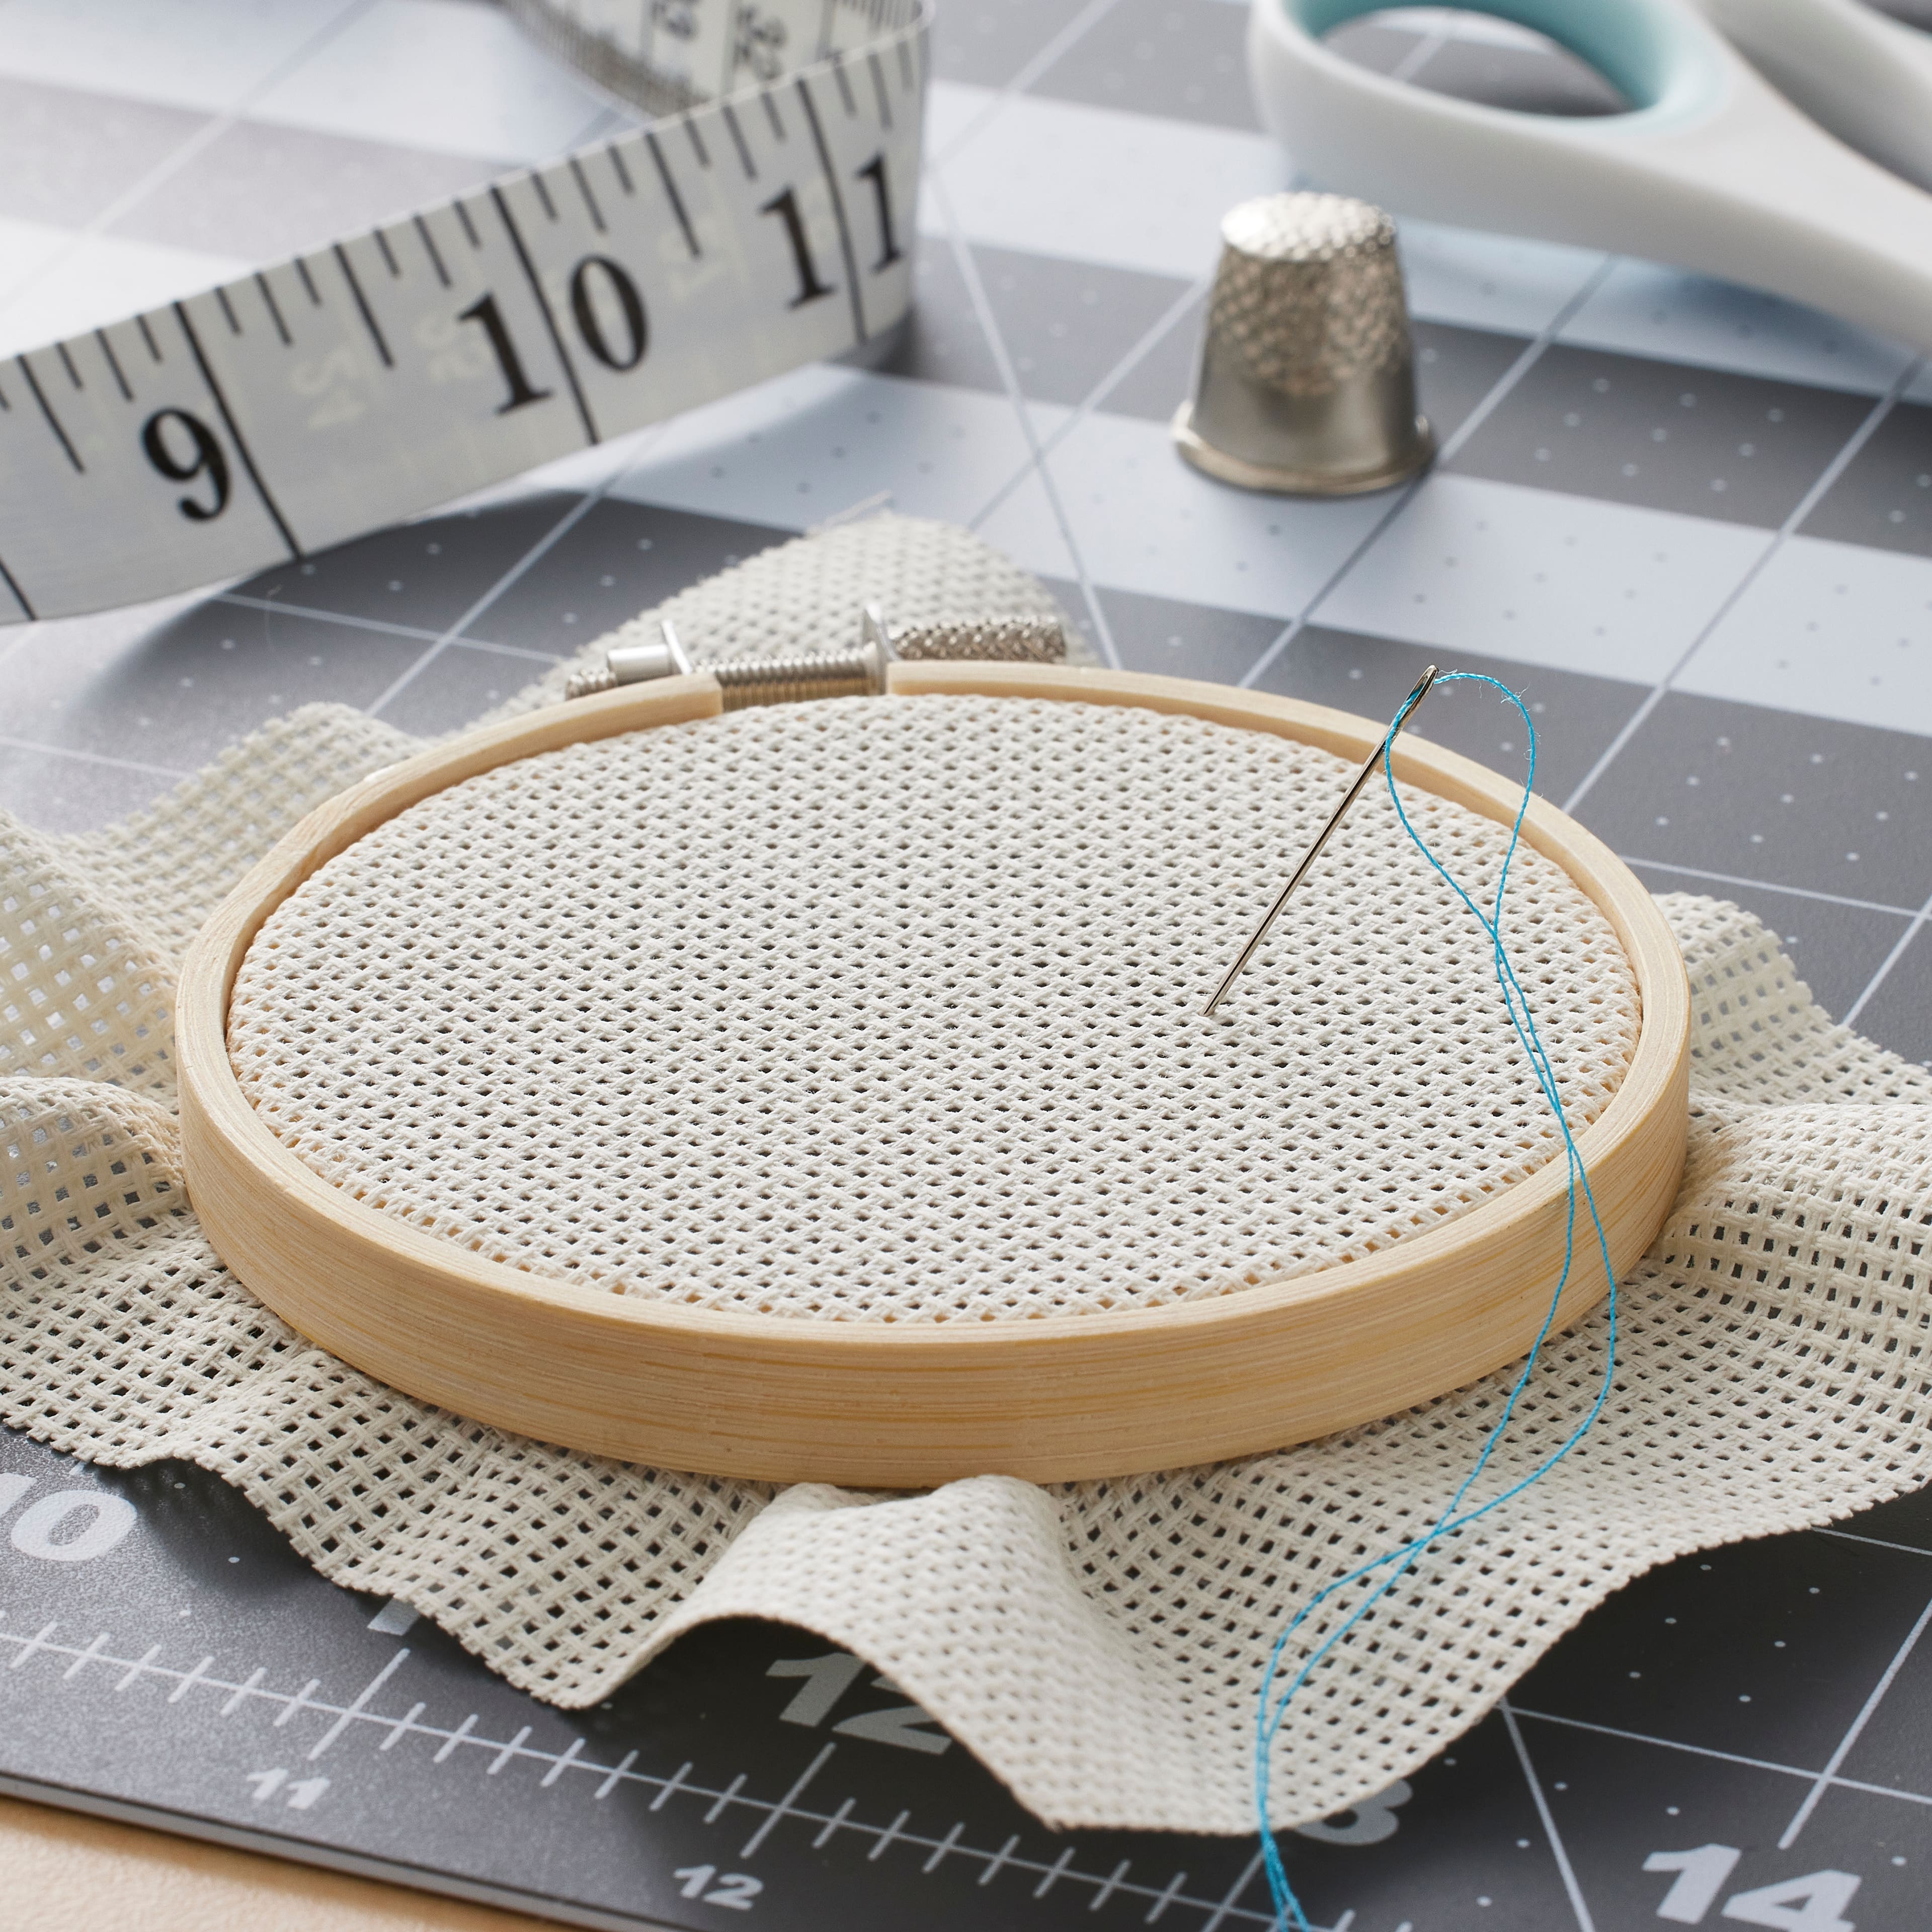 Set Of 12 6 Inch Bamboo Circle Cross Stitch Hardwood Hoops For Art Crafts  And Sewing From Imeav, $31.02